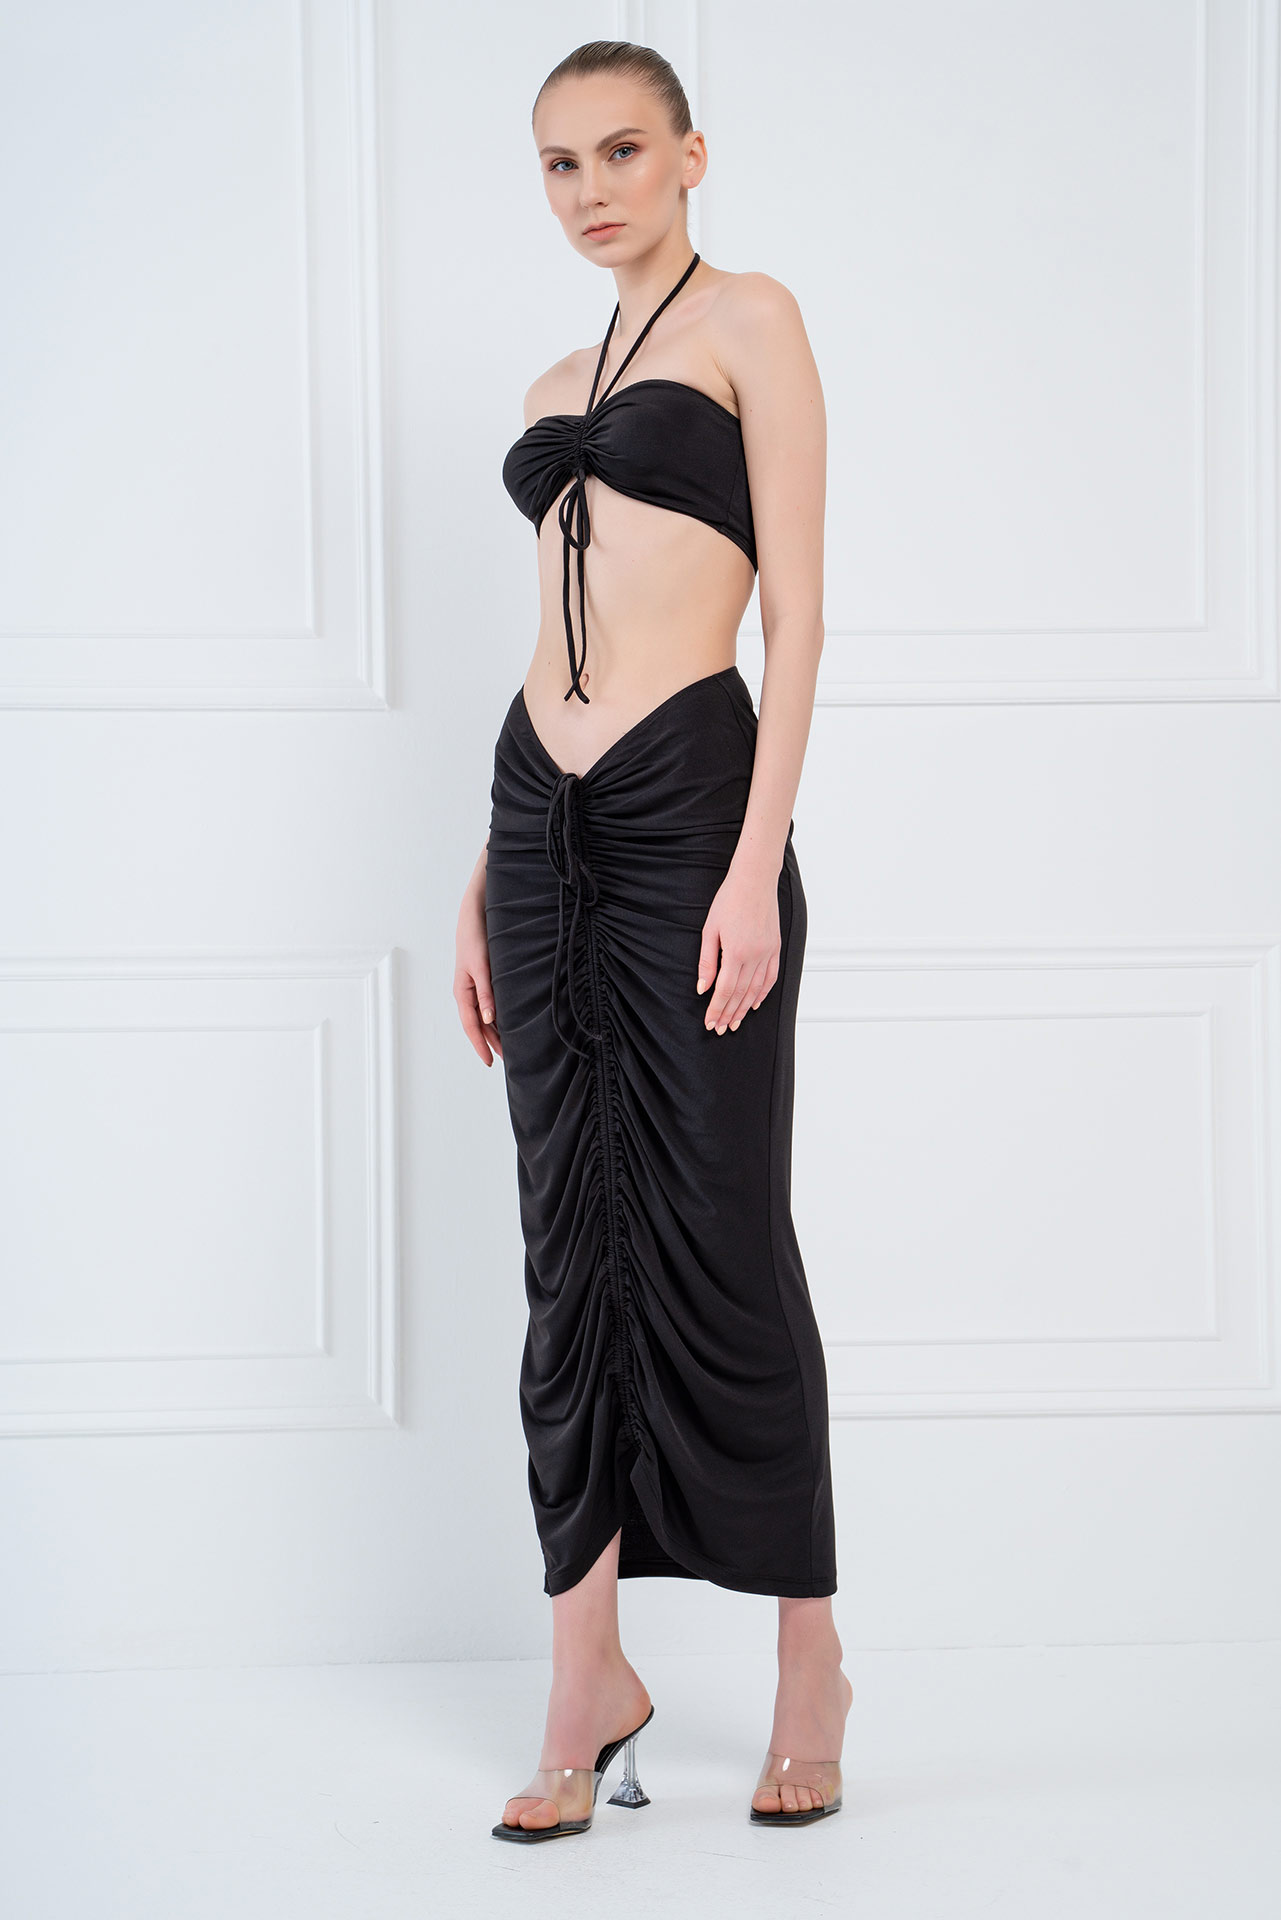 Black Halter Tube Top ☀ Ruched Maxi ...